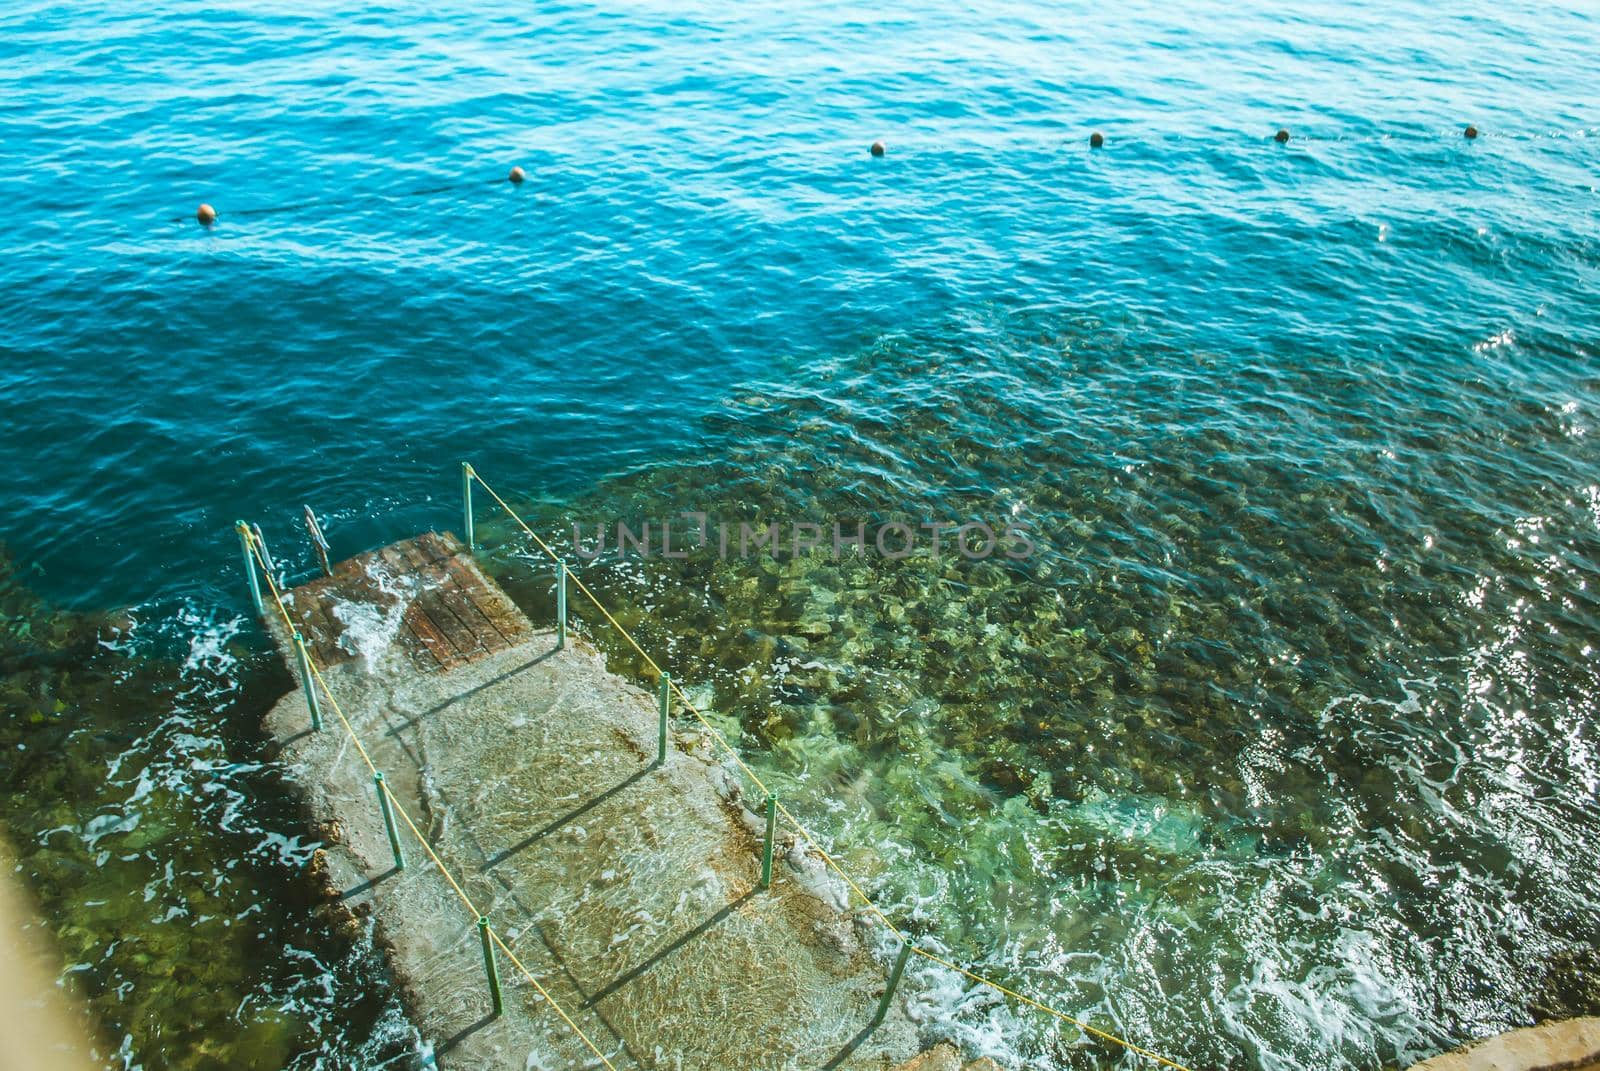 wooden pier in the sea with waves. High quality photo